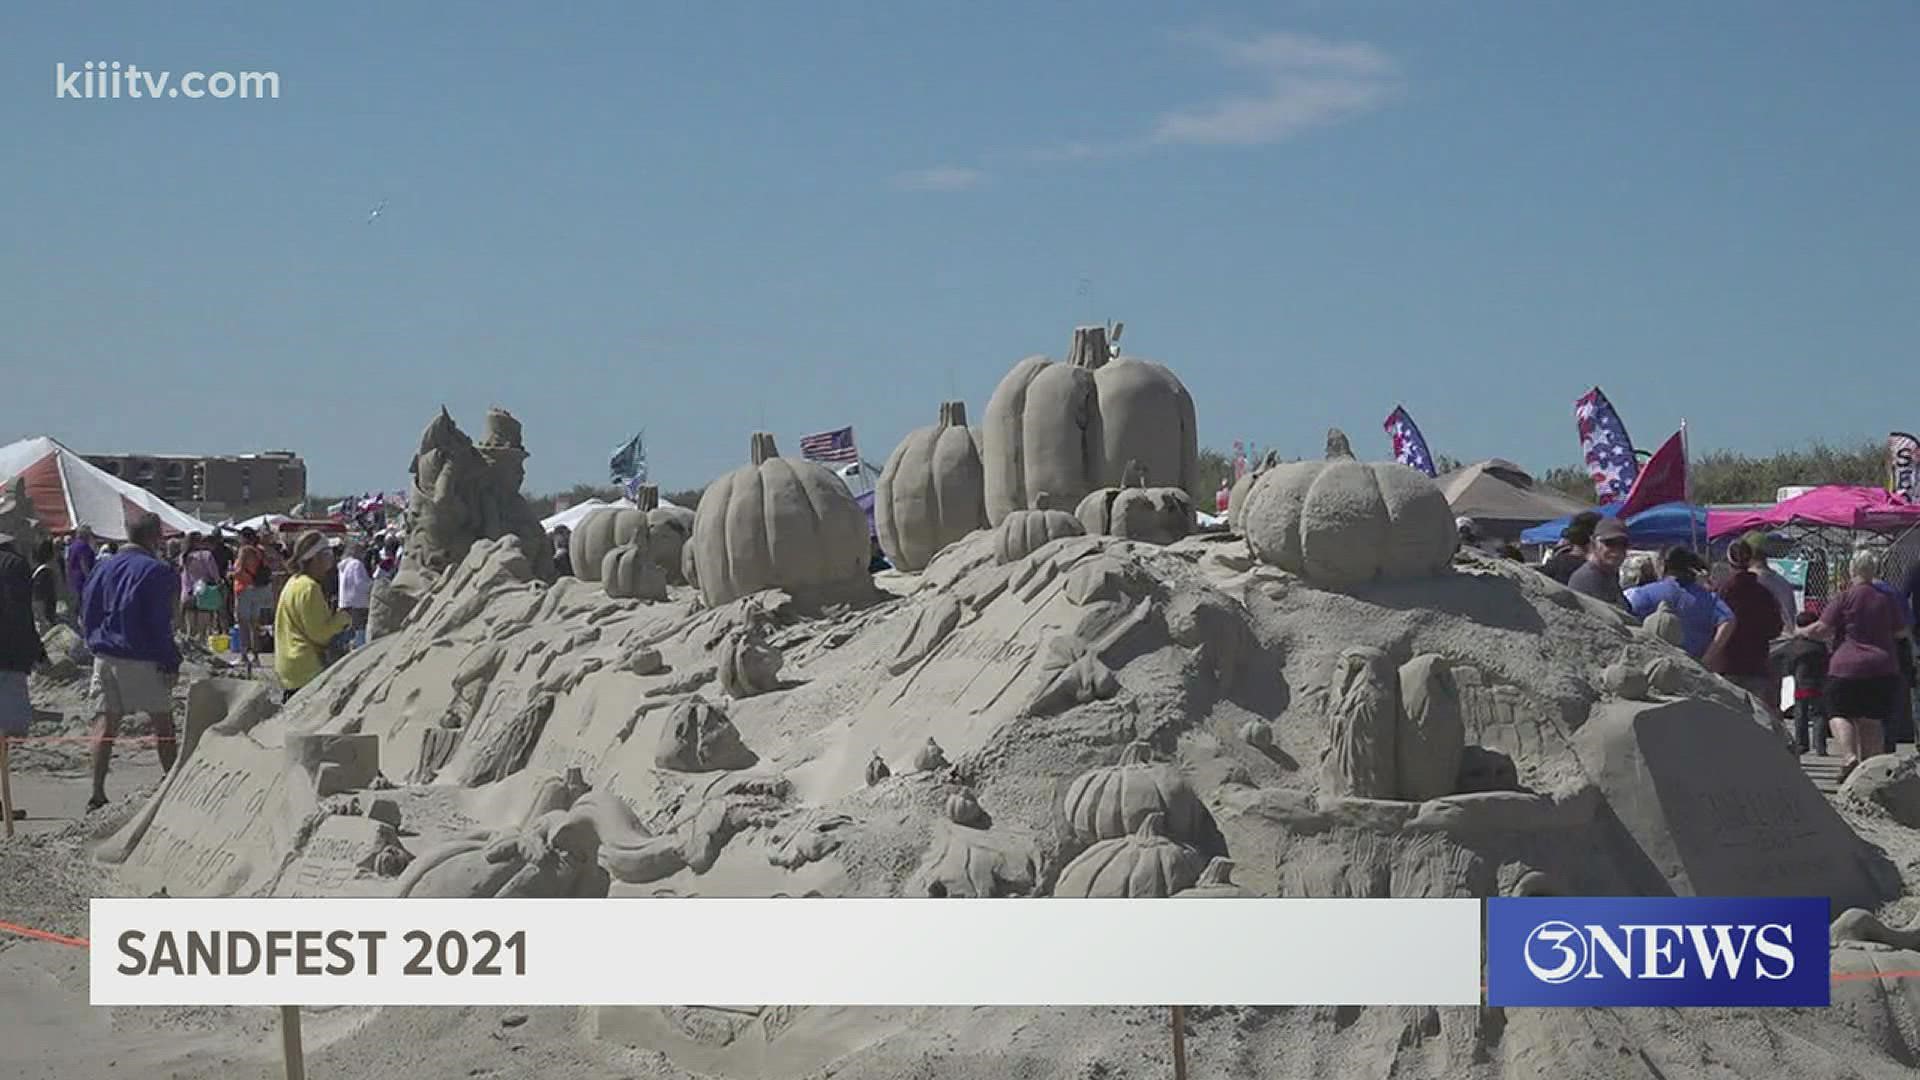 According to Texas Sandfest Board Member Rene Cano, crowds from all over came to be a part of the festivities.